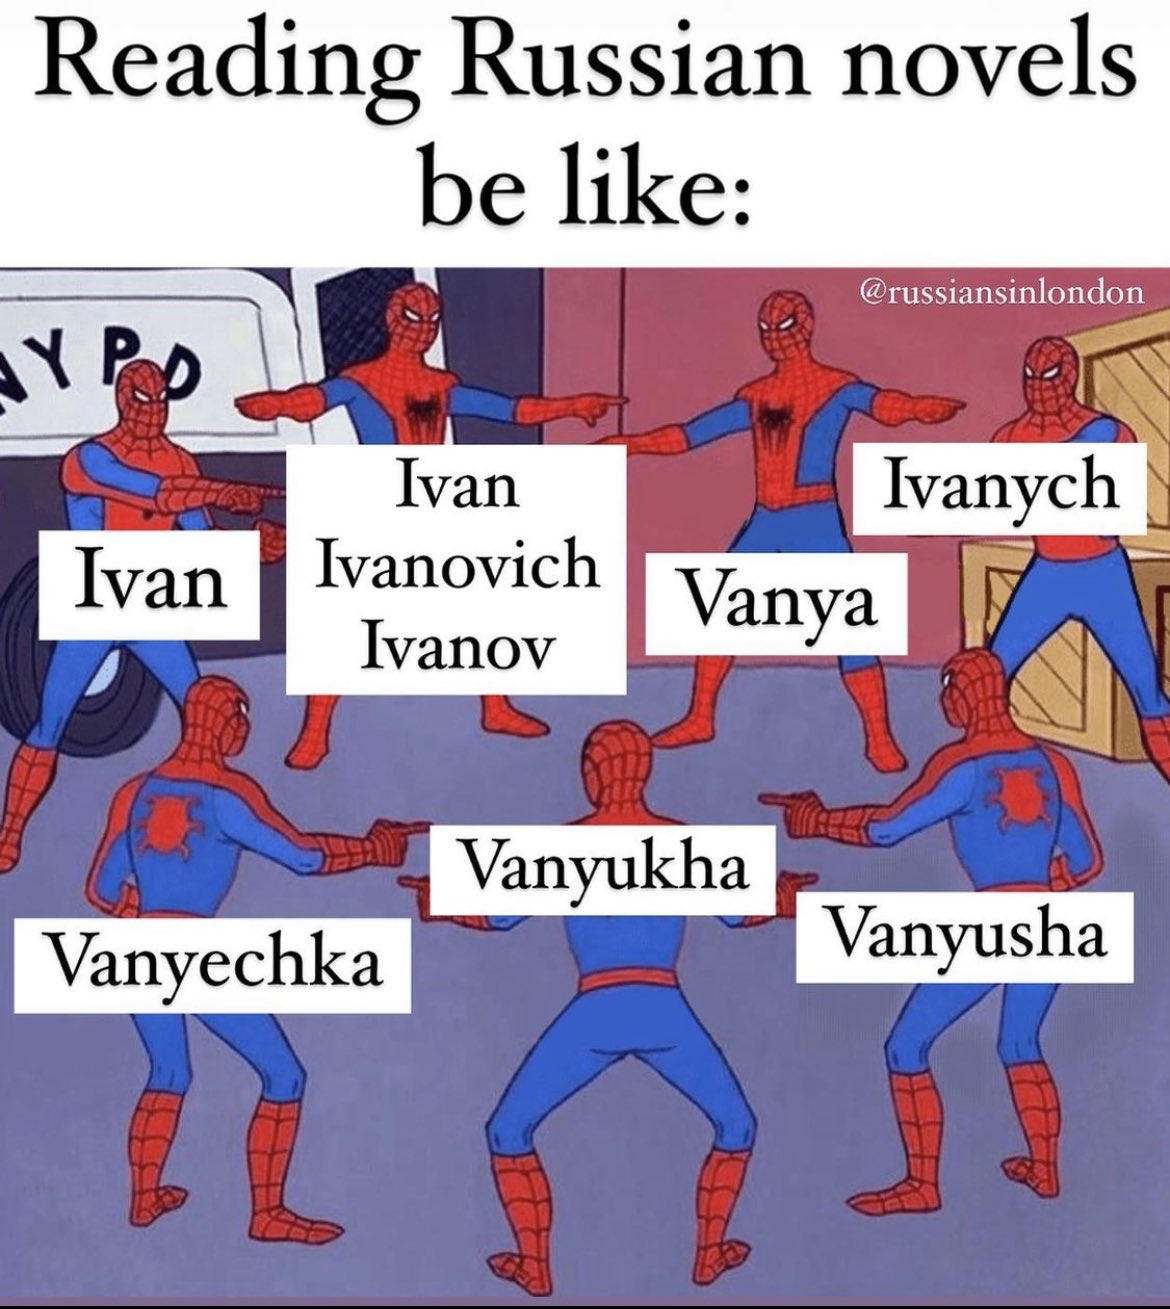 r/russian - Reading Russian literature be like